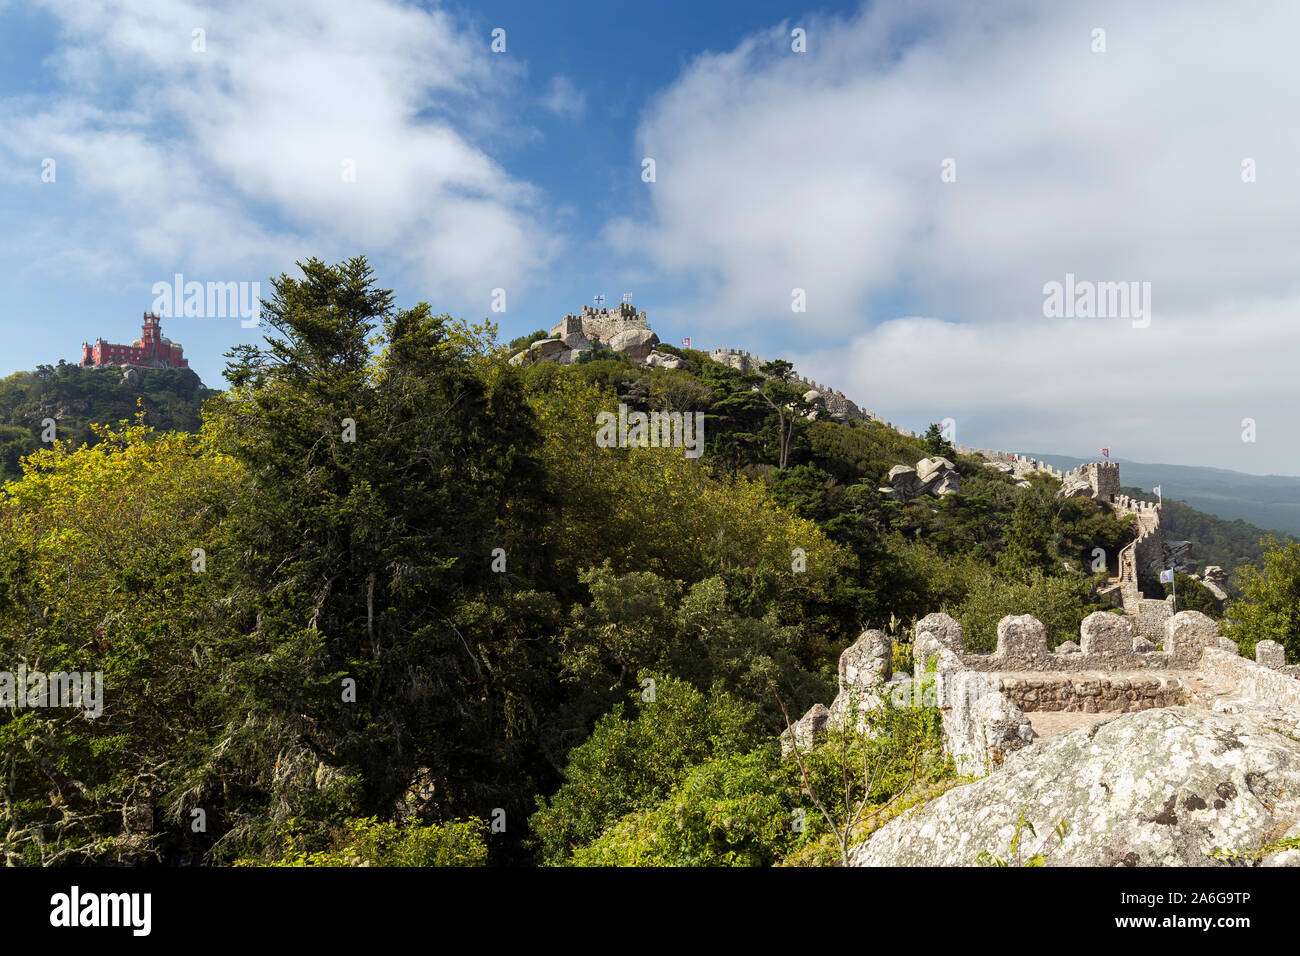 https://c8.alamy.com/comp/2A6G9TP/scenic-view-of-the-pena-palace-palacio-da-pena-and-medieval-hilltop-castle-castelo-dos-mouros-the-castle-of-the-moors-in-sintra-portugal-2A6G9TP.jpg